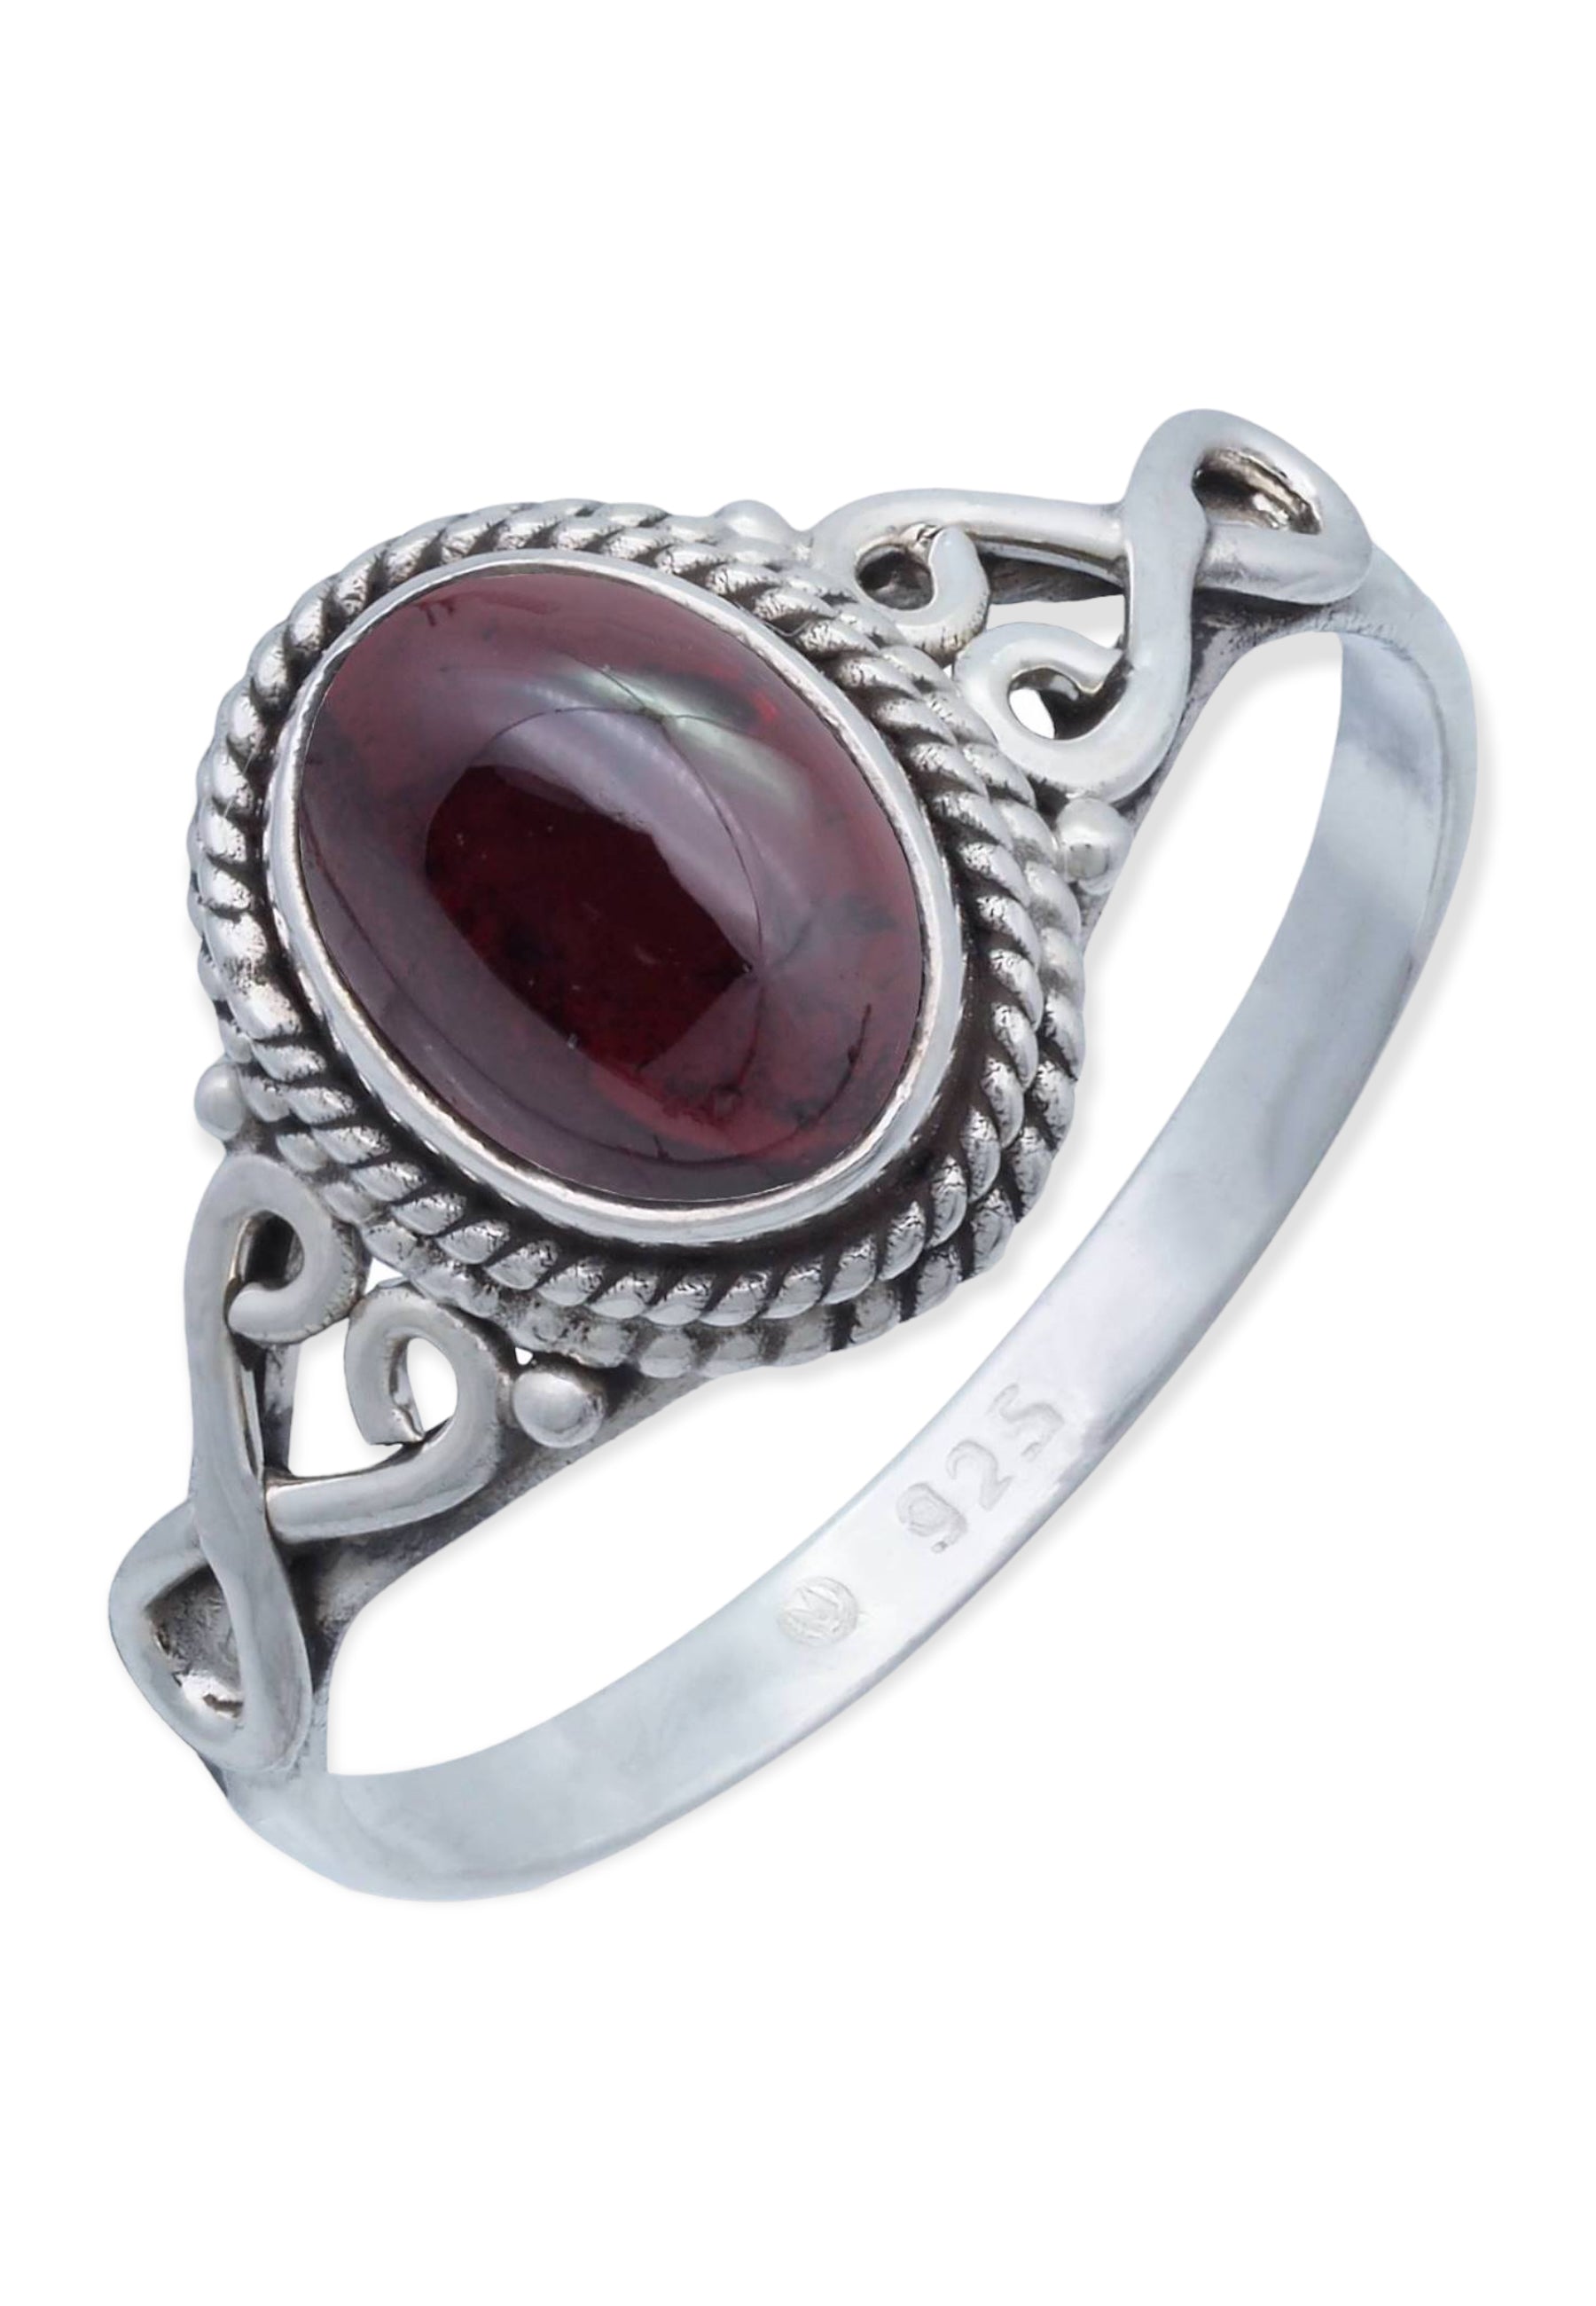 Ring BAGHIMI oval made of 925 sterling silver